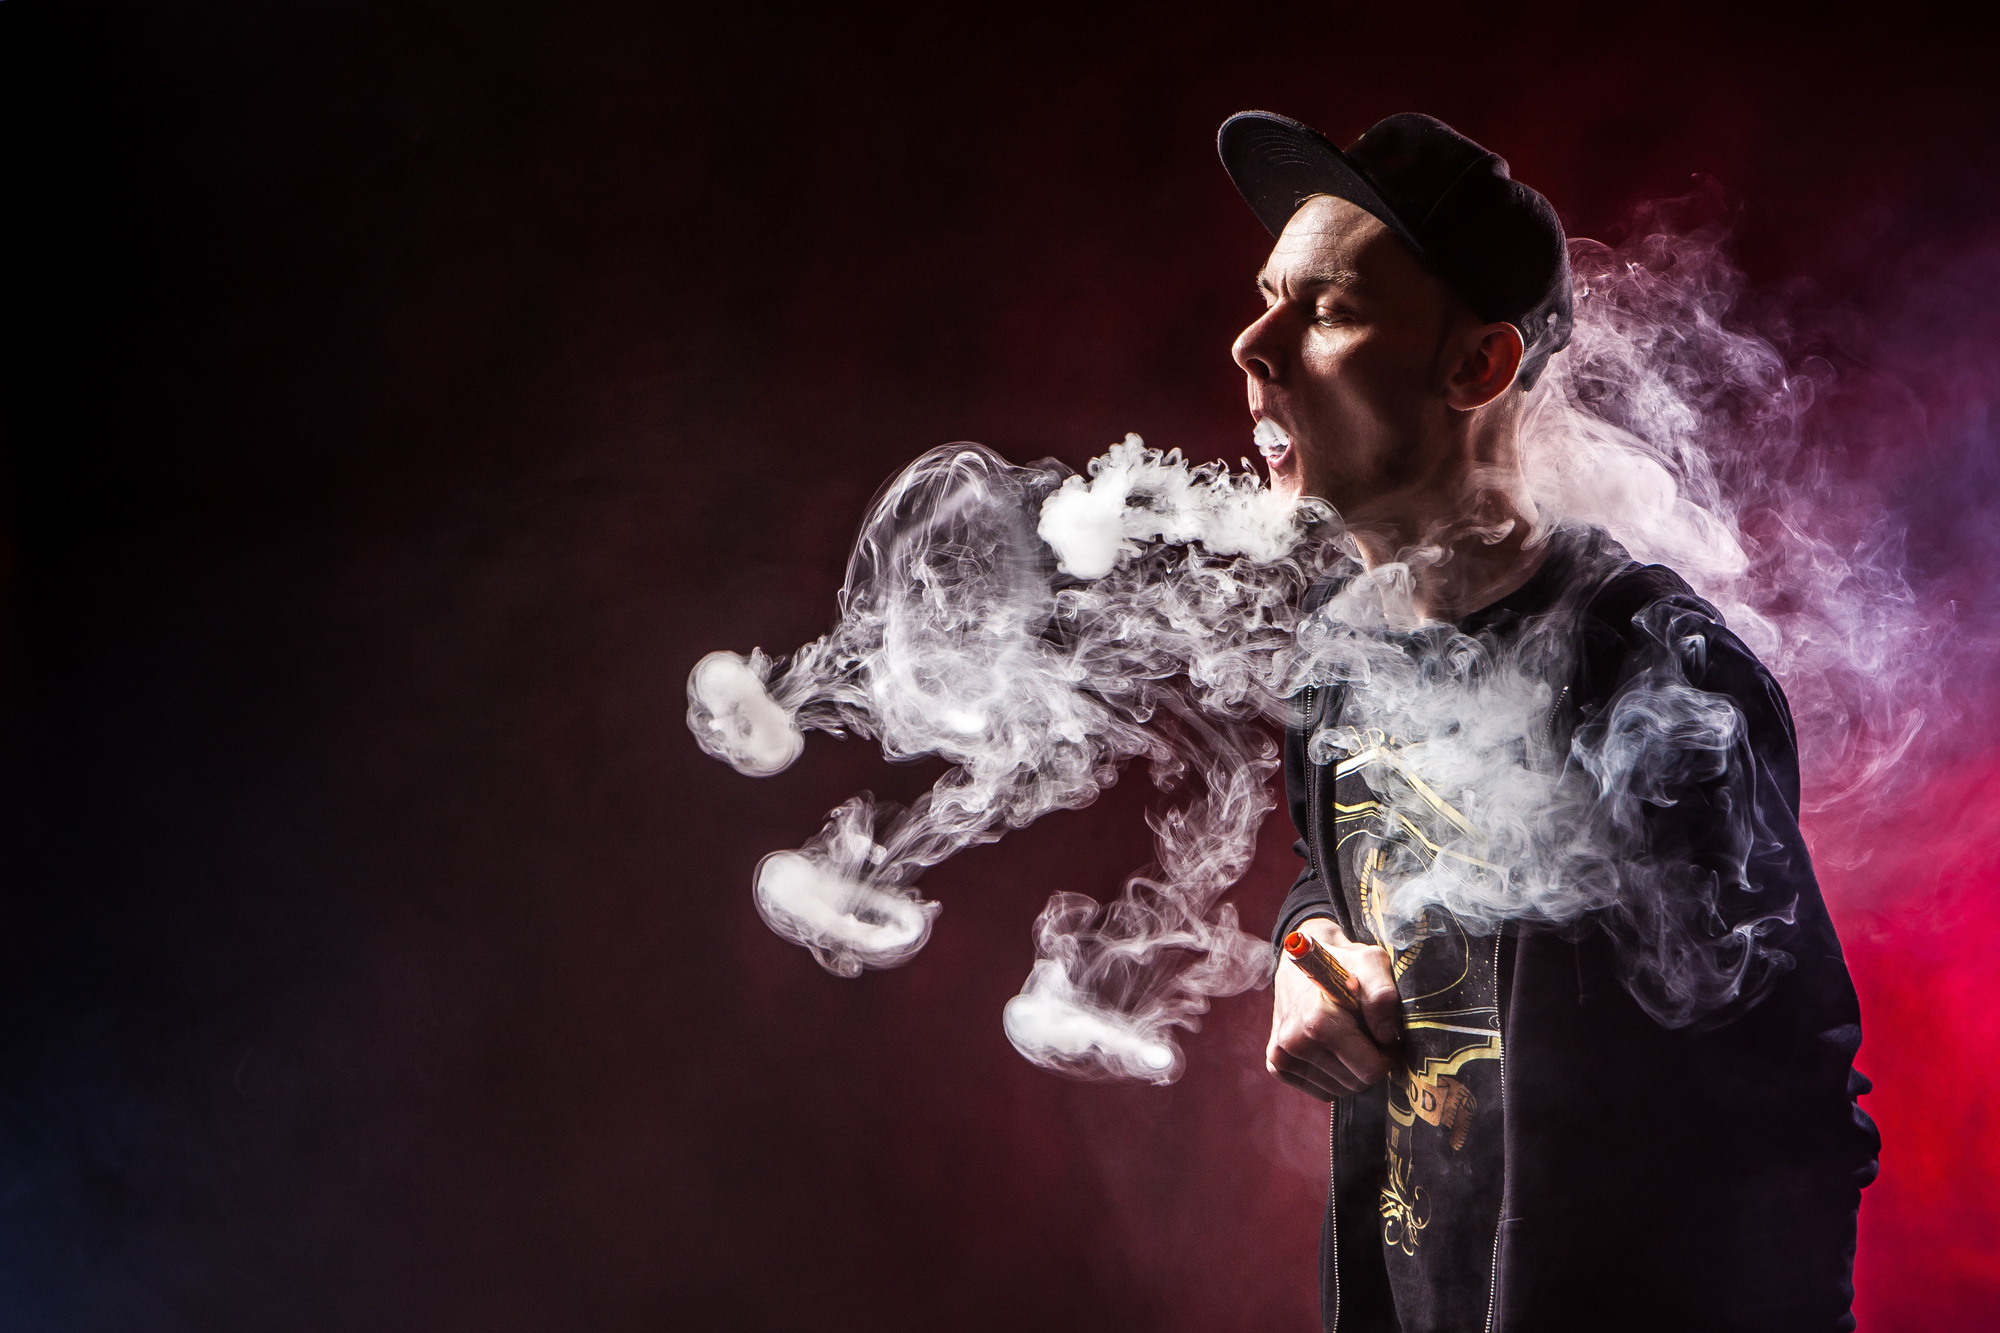 The Best Vape Tricks to Learn for Any Skill Level